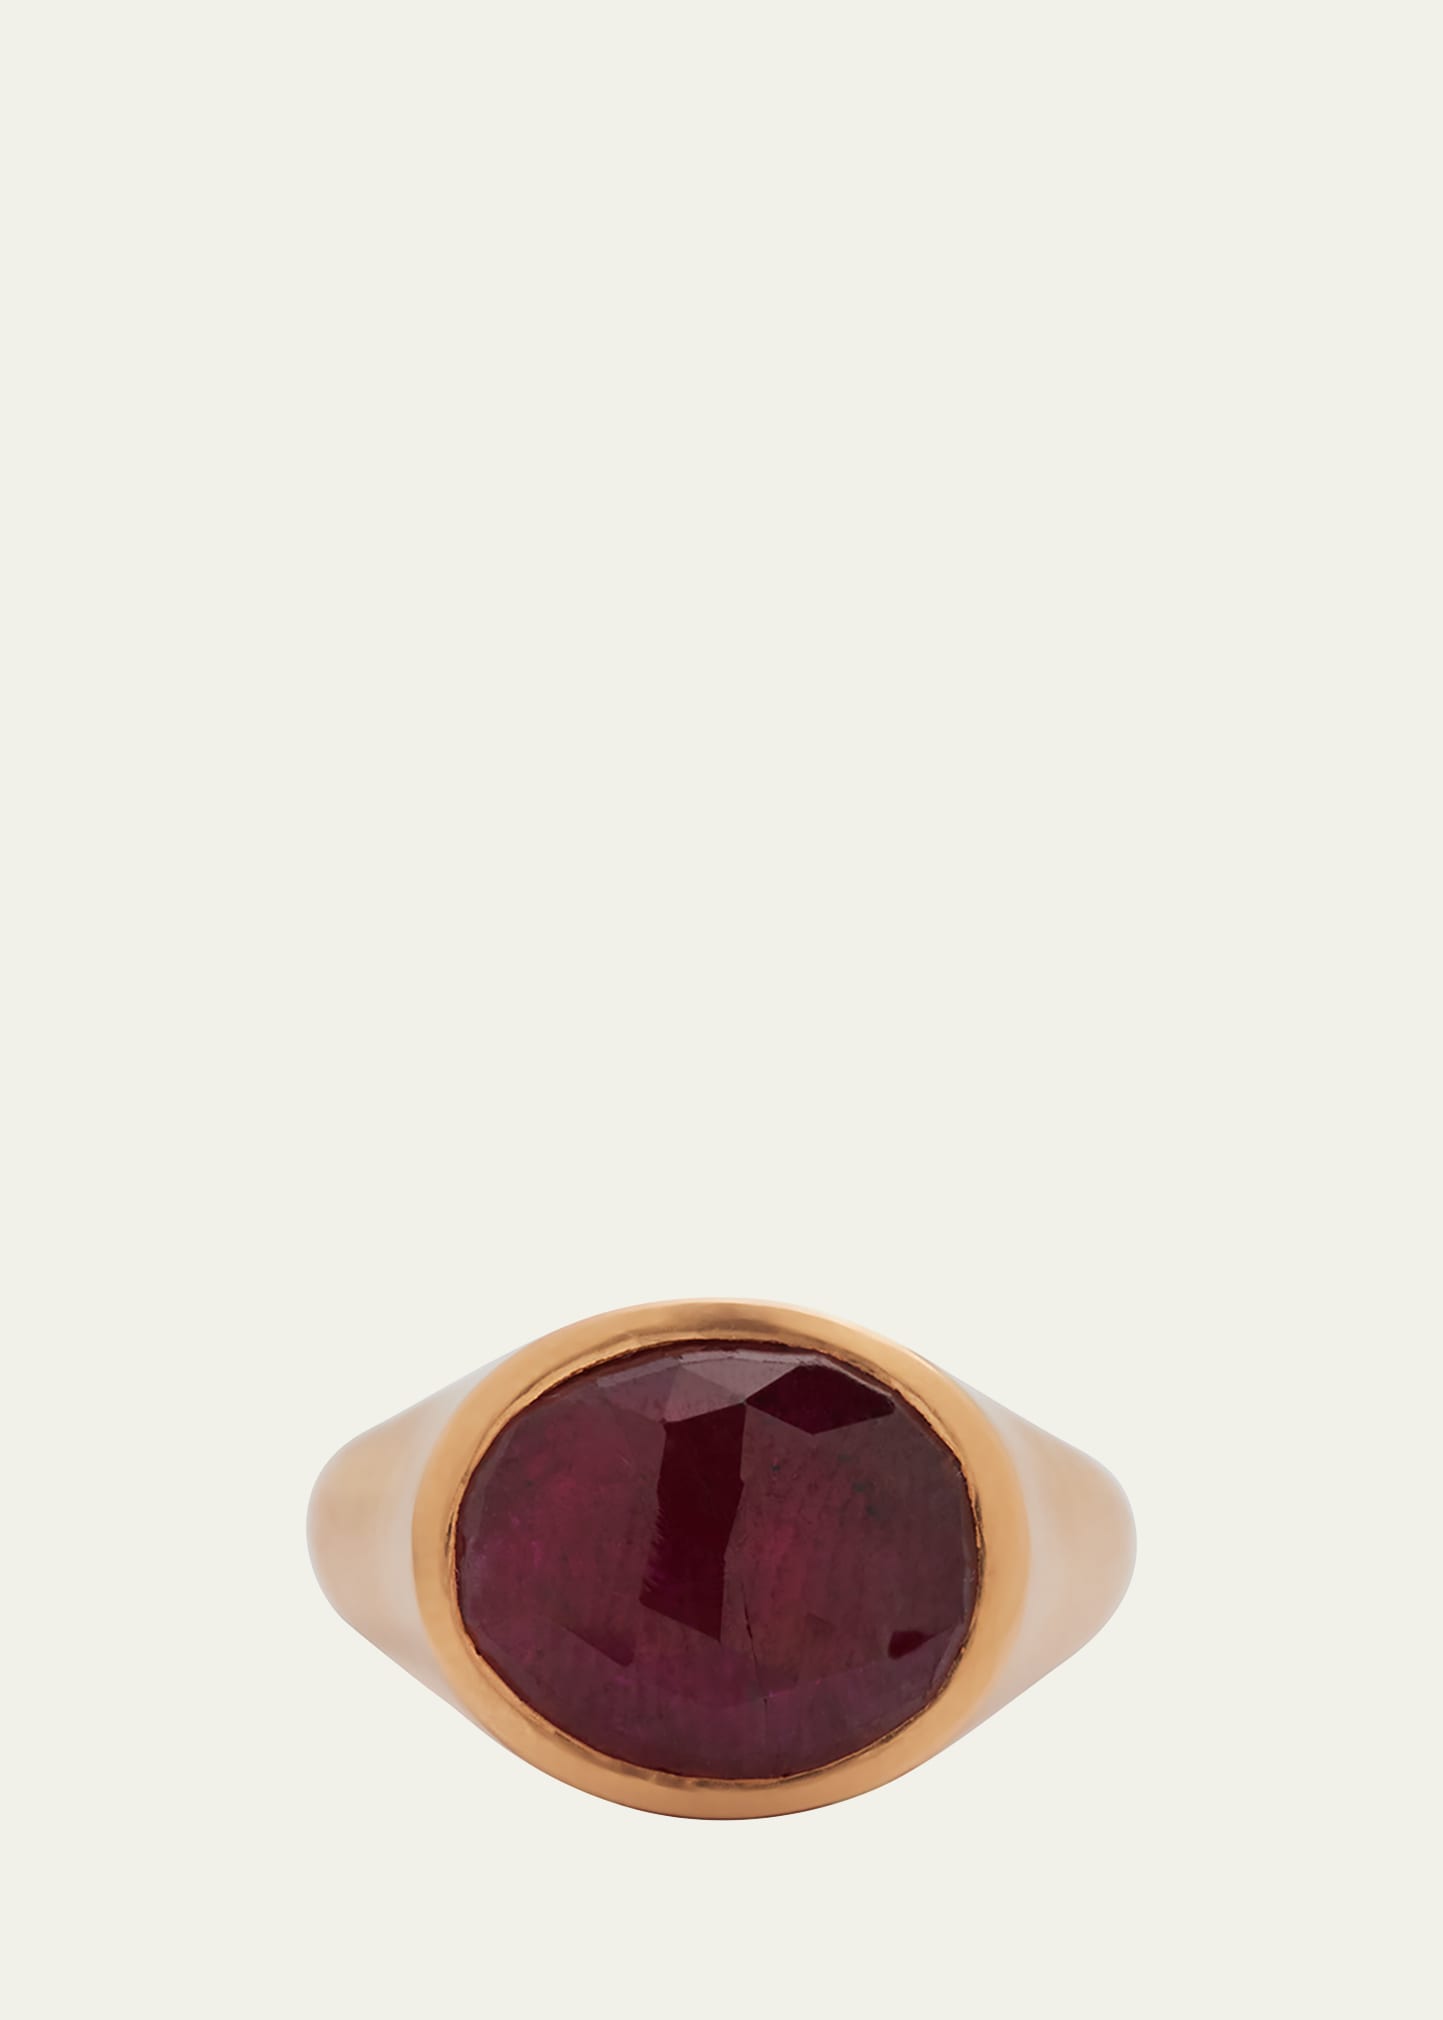 Men's 18K Rose Gold Ruby Solitaire Ring